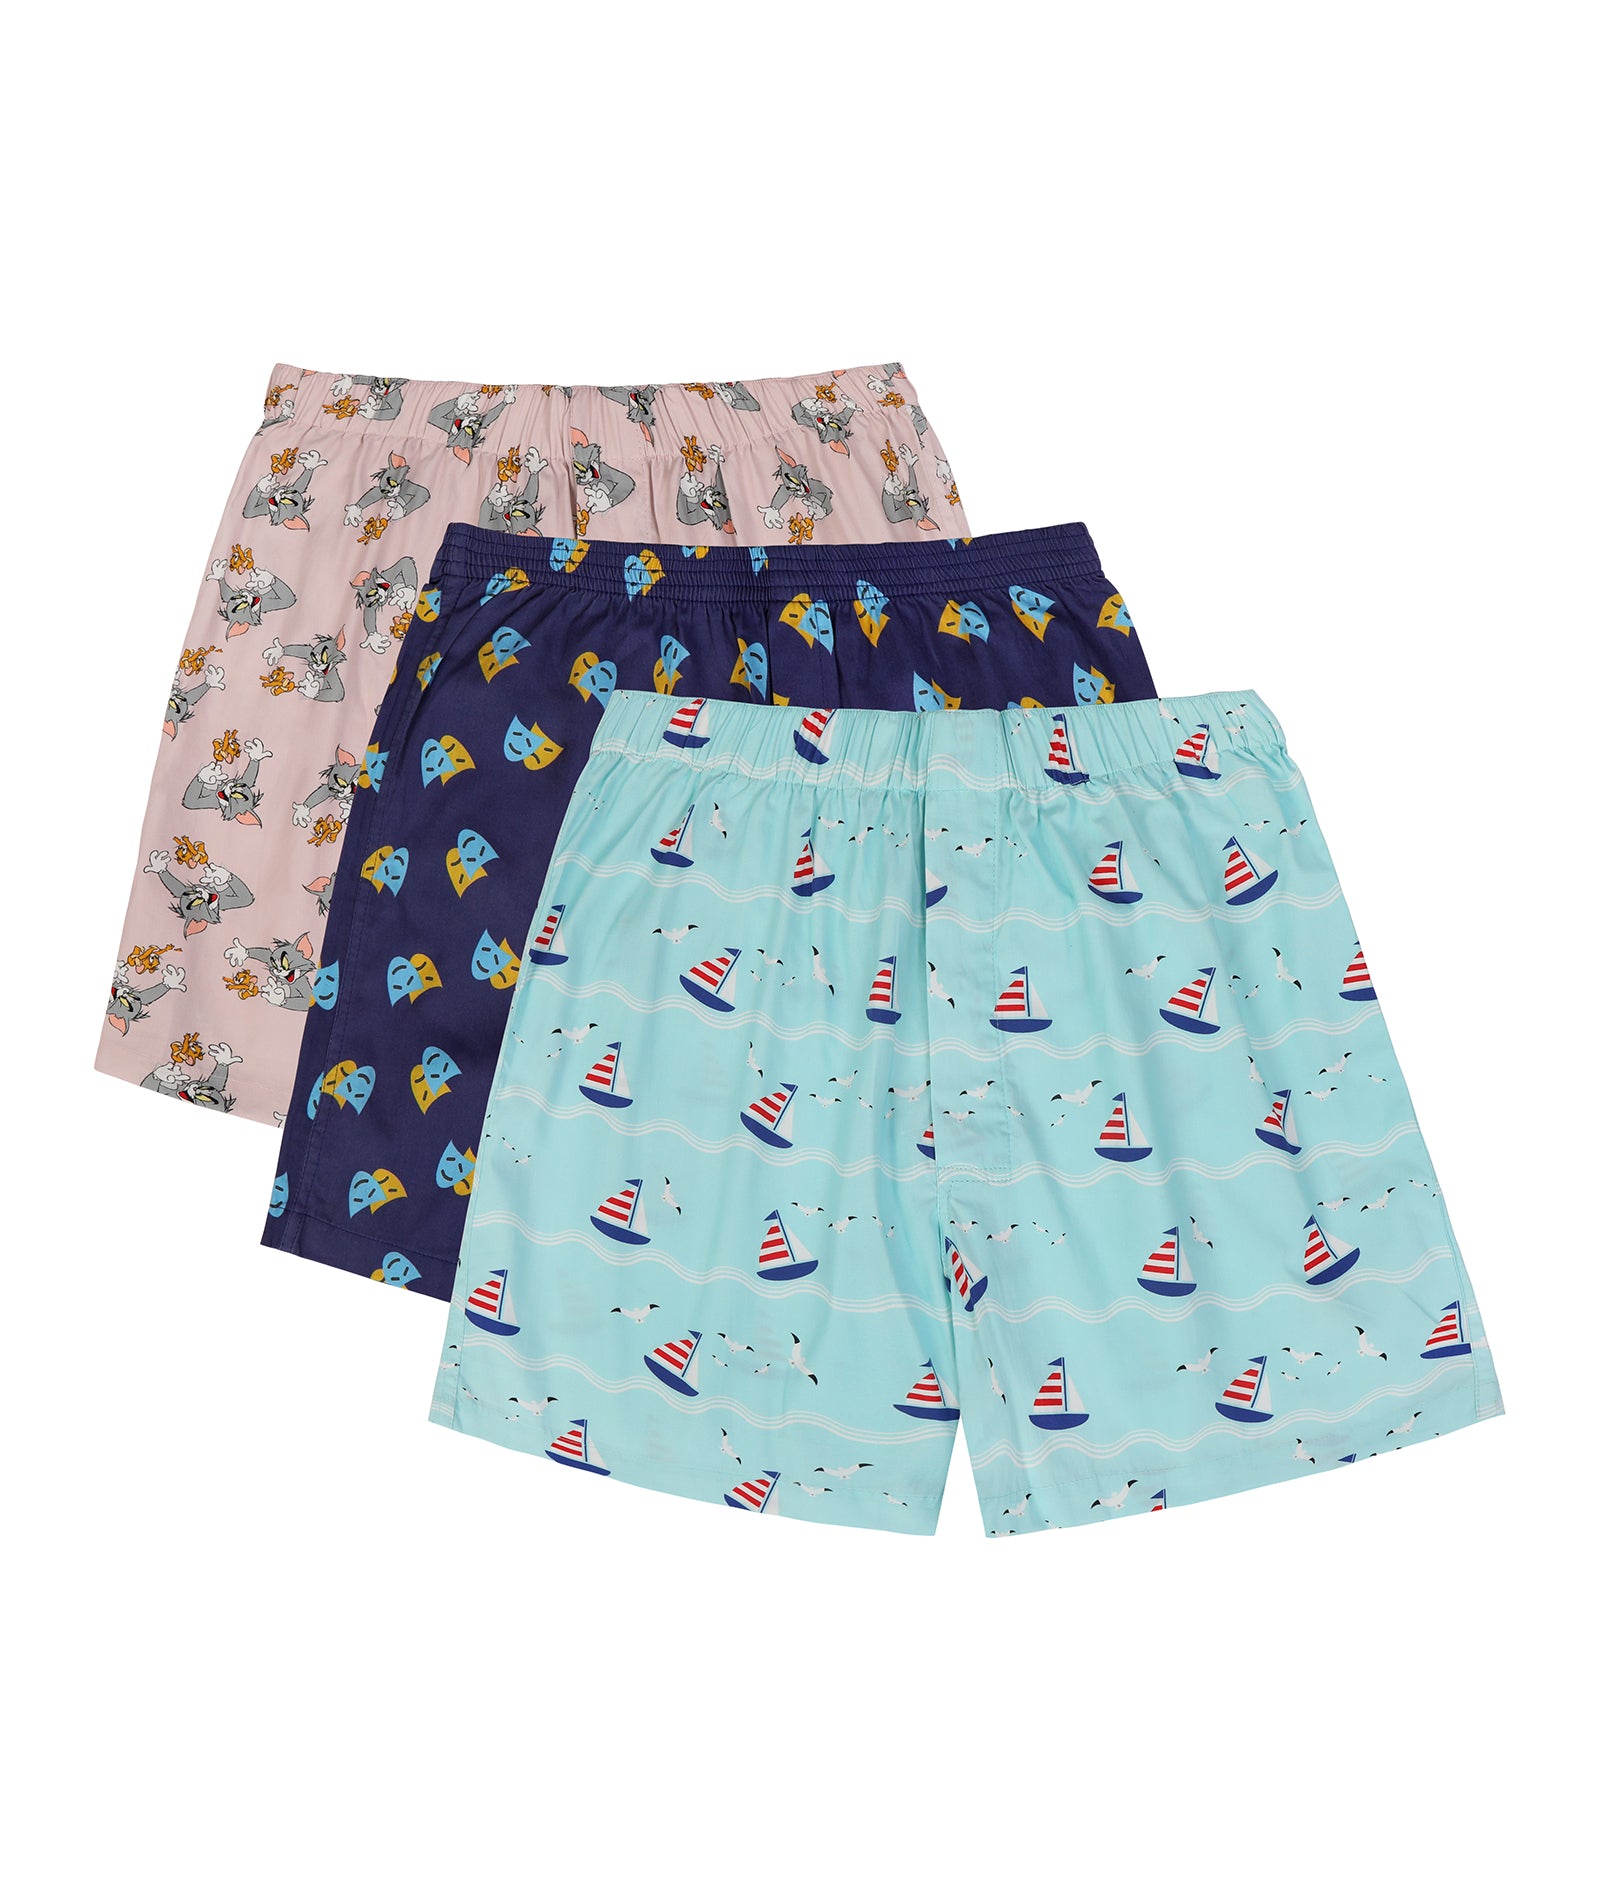 Set of 3 boxers - Tom and Jerry, Masquerade, Sail Boat